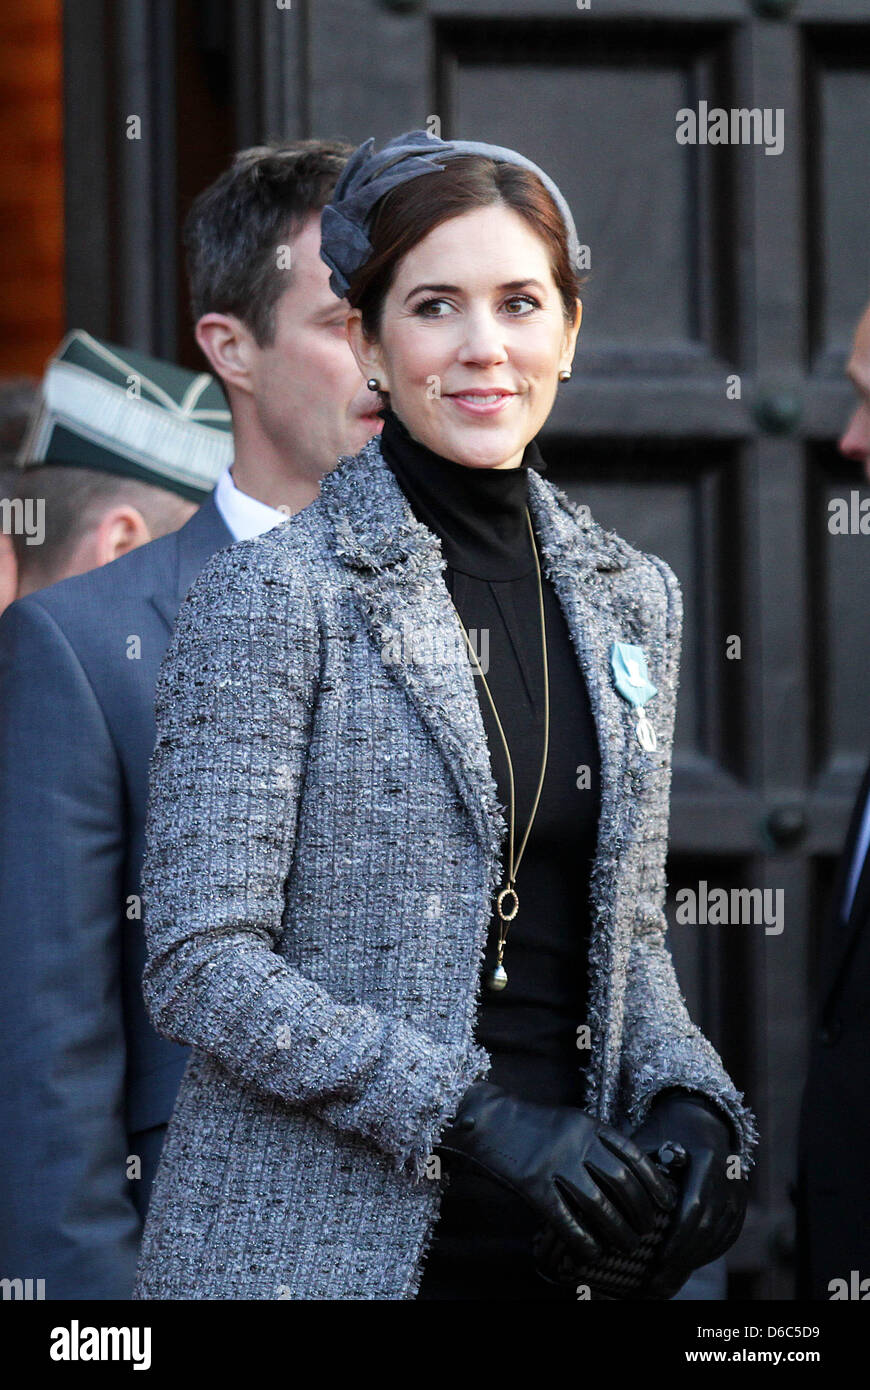 crown-princess-mary-attends-the-reception-at-the-city-hall-in-copenhagen-D6C5D9.jpg